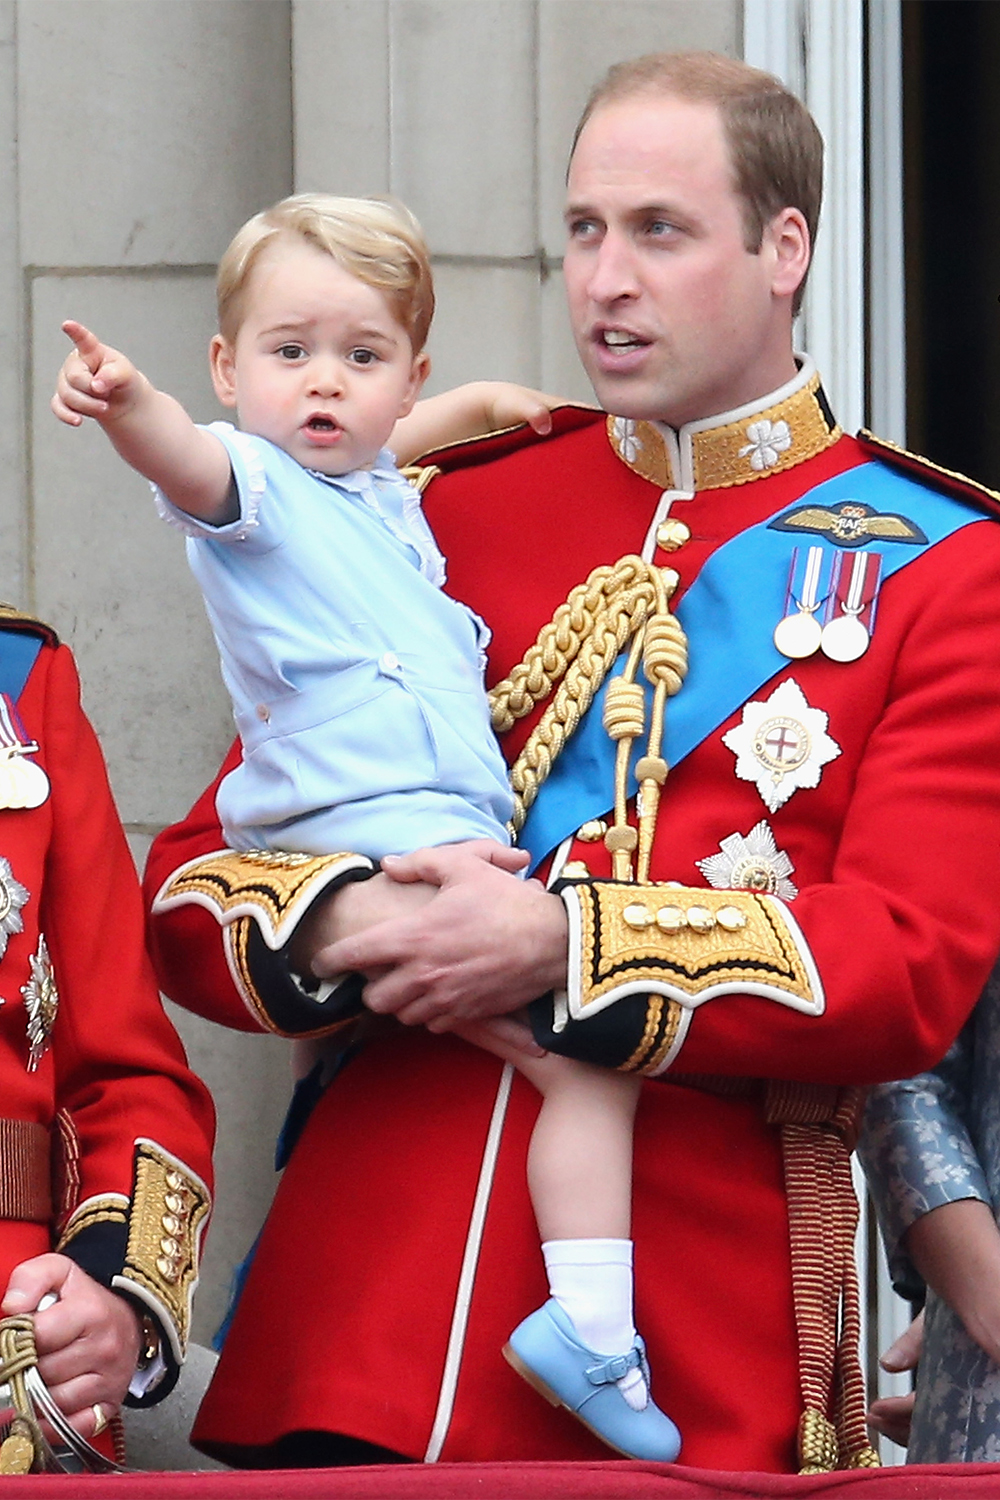 On the balcony of Buckingham Palace with his father Prince William during the Queen's 90th birthday celebrations on June 13, 2015.